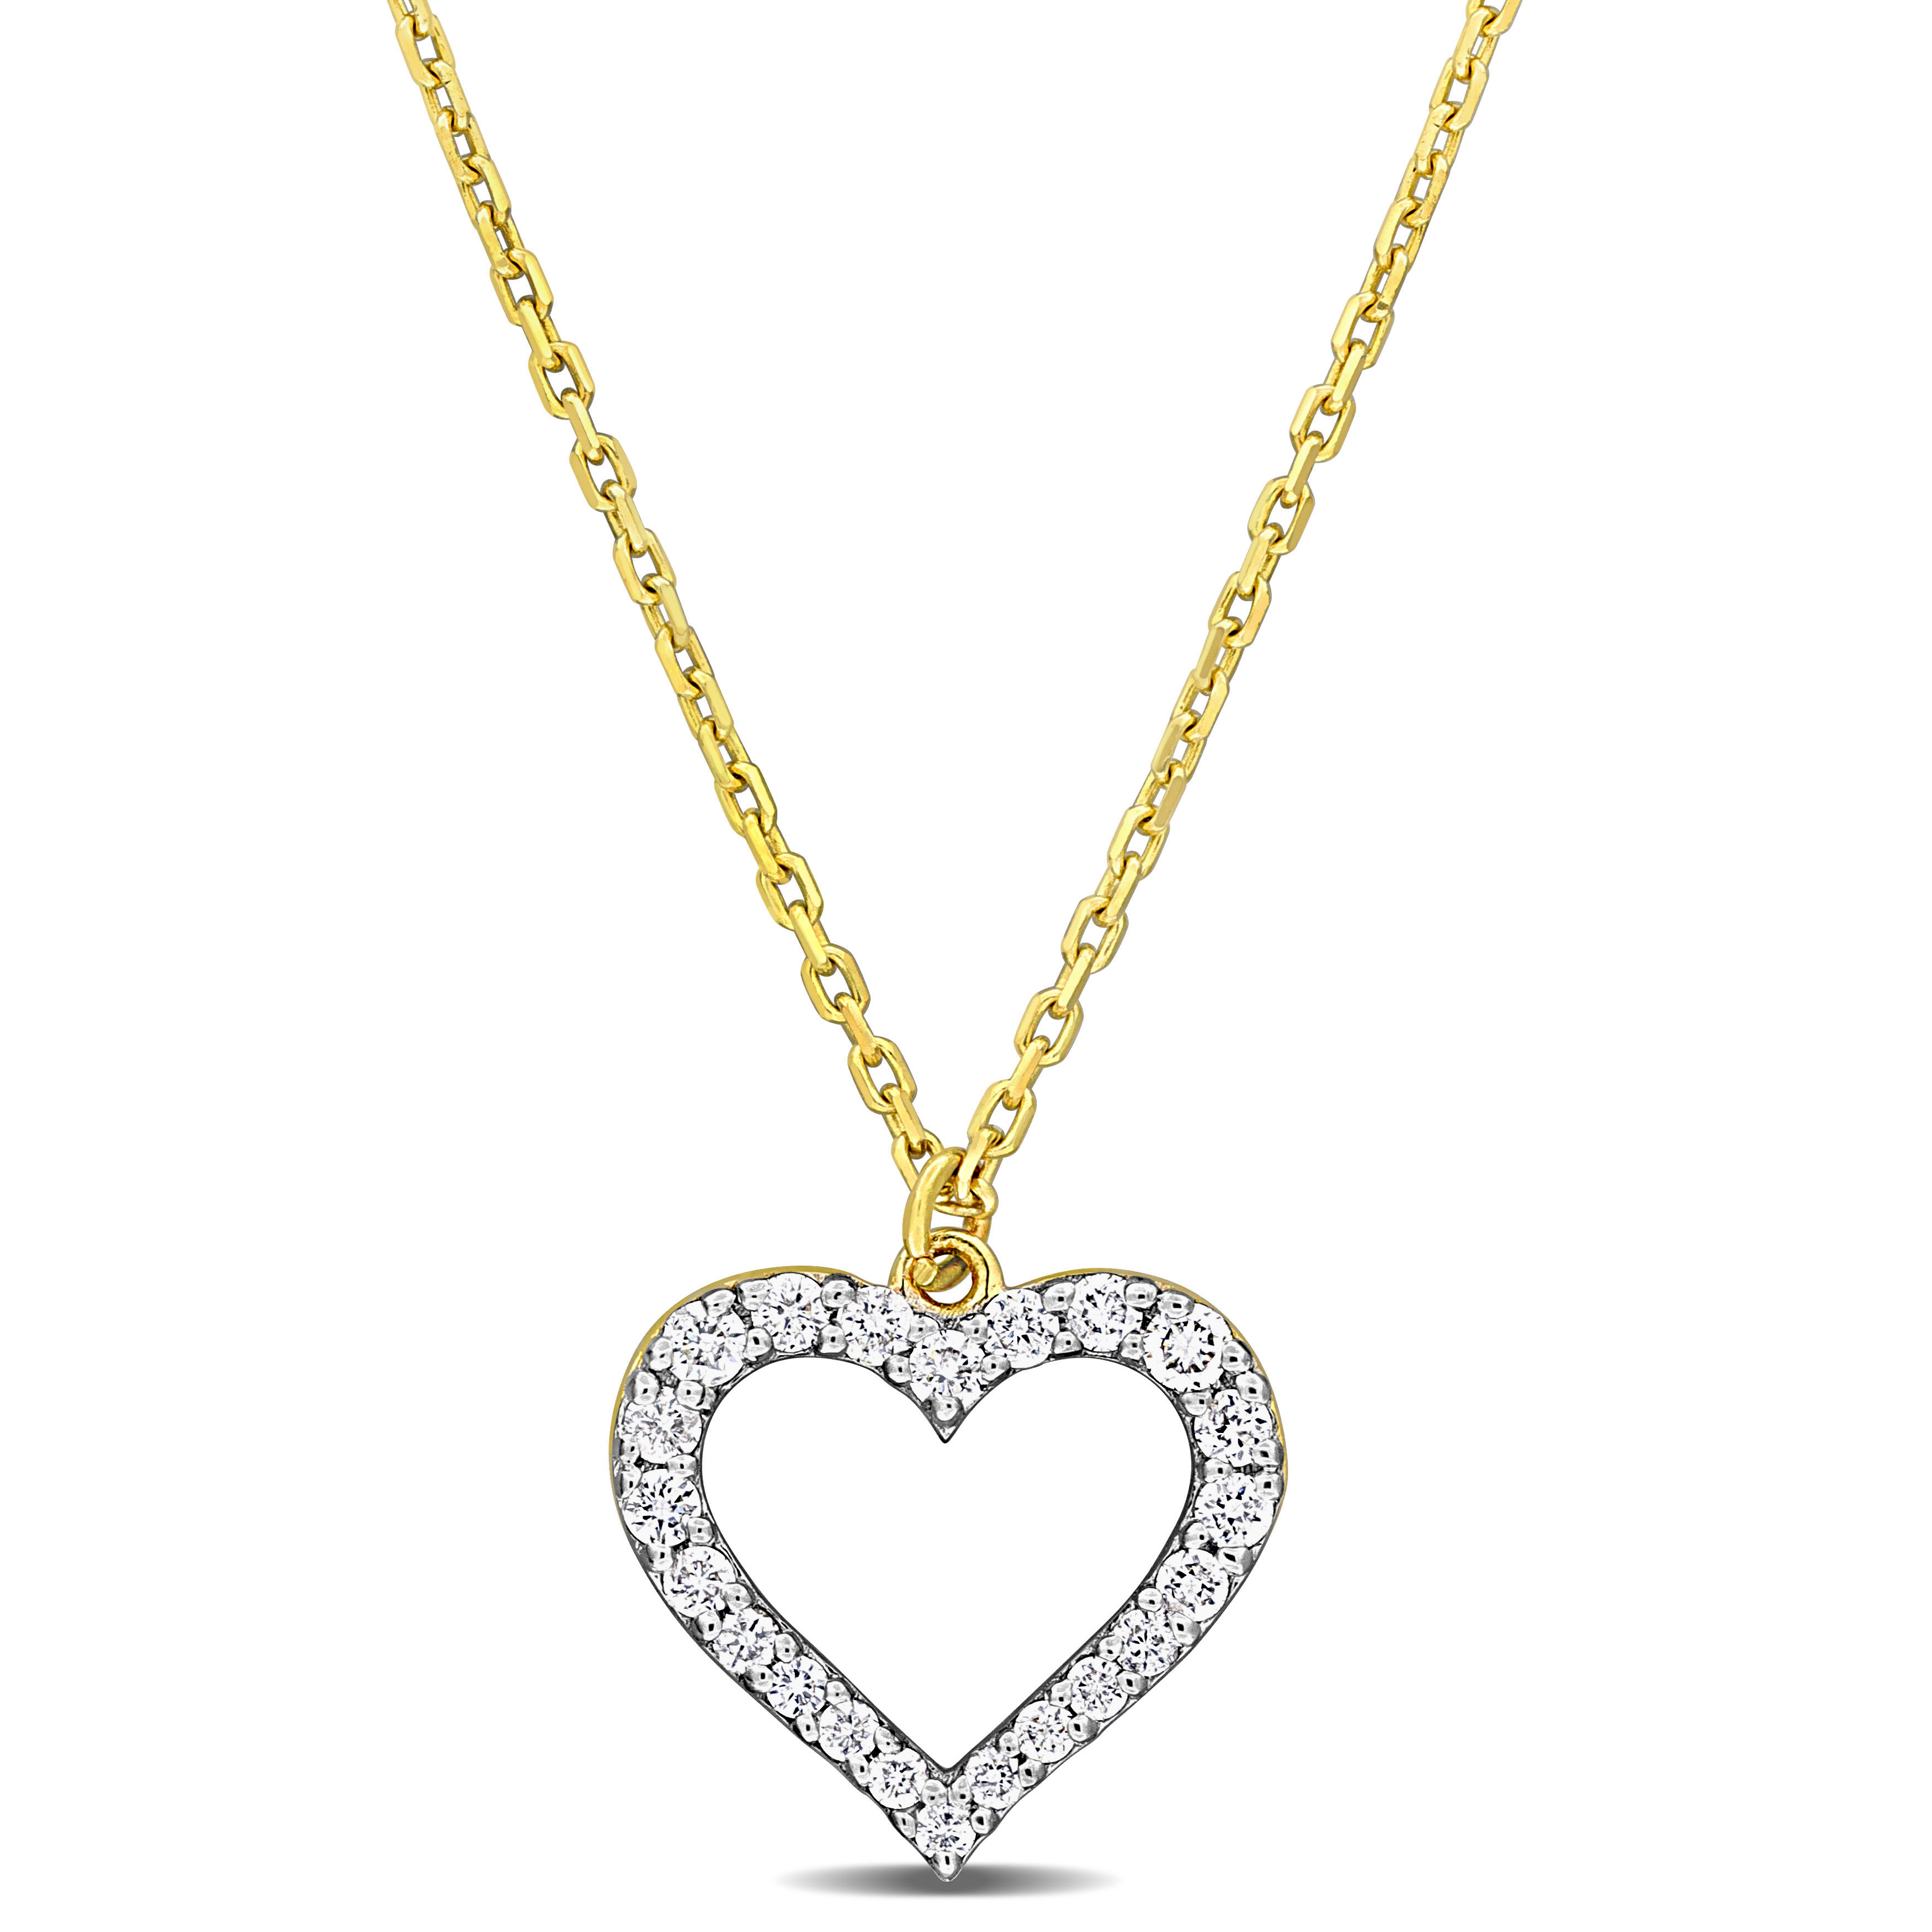 1/5 CT TDW Diamond Heart Pendant with Chain Necklace in 10k Yellow Gold - 17 in